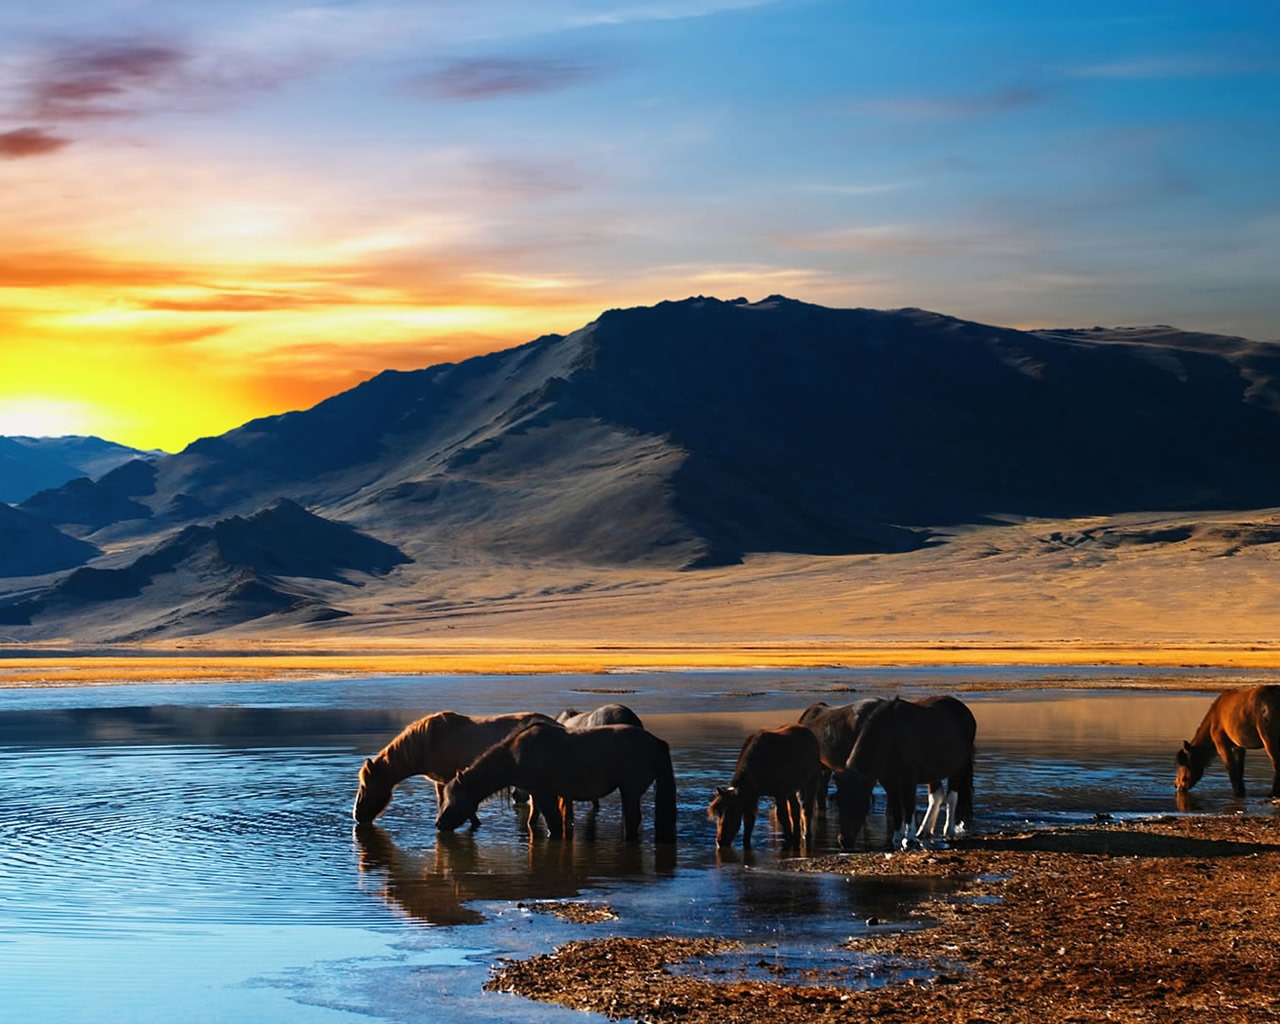 Amazing Scene with Horses for 1280 x 1024 resolution